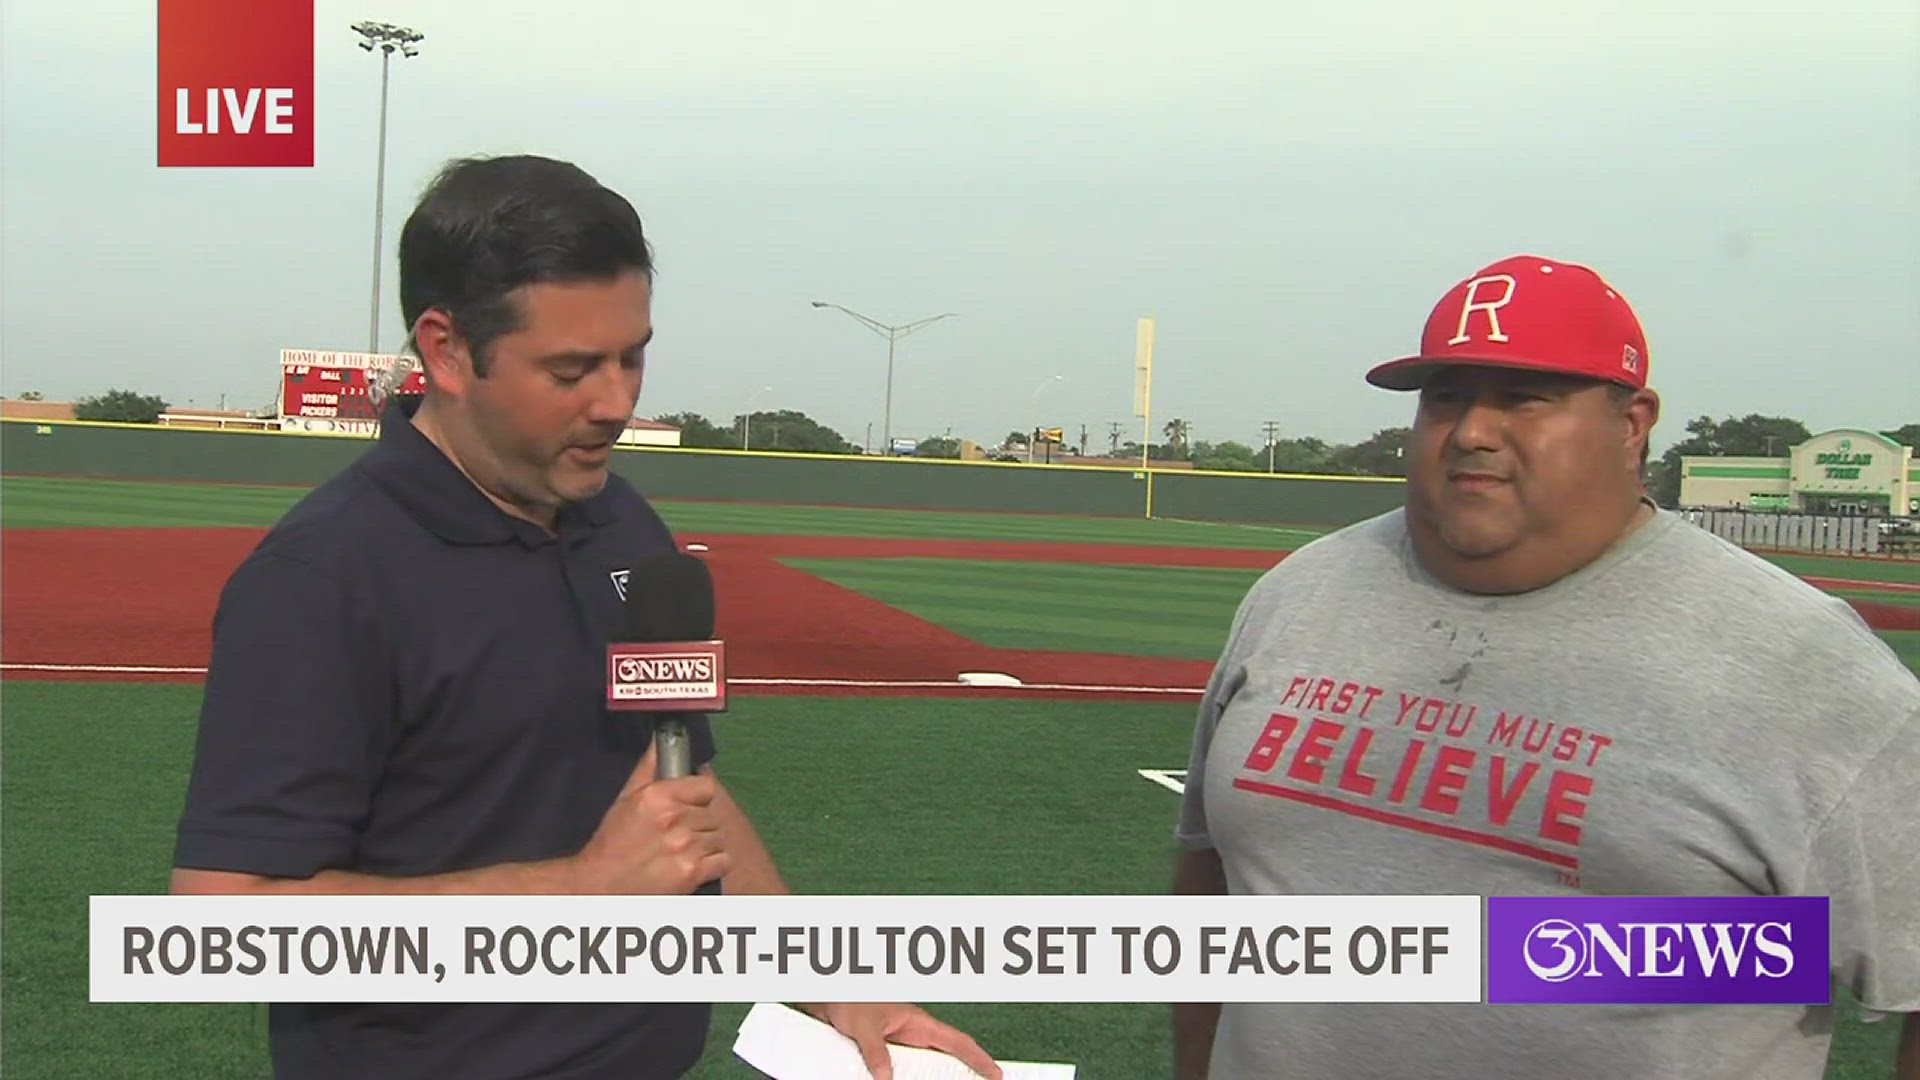 The Pickers saw their second round opponent Rockport-Fulton earlier this season in the Sinton Tournament, a 5-3 Robstown win.